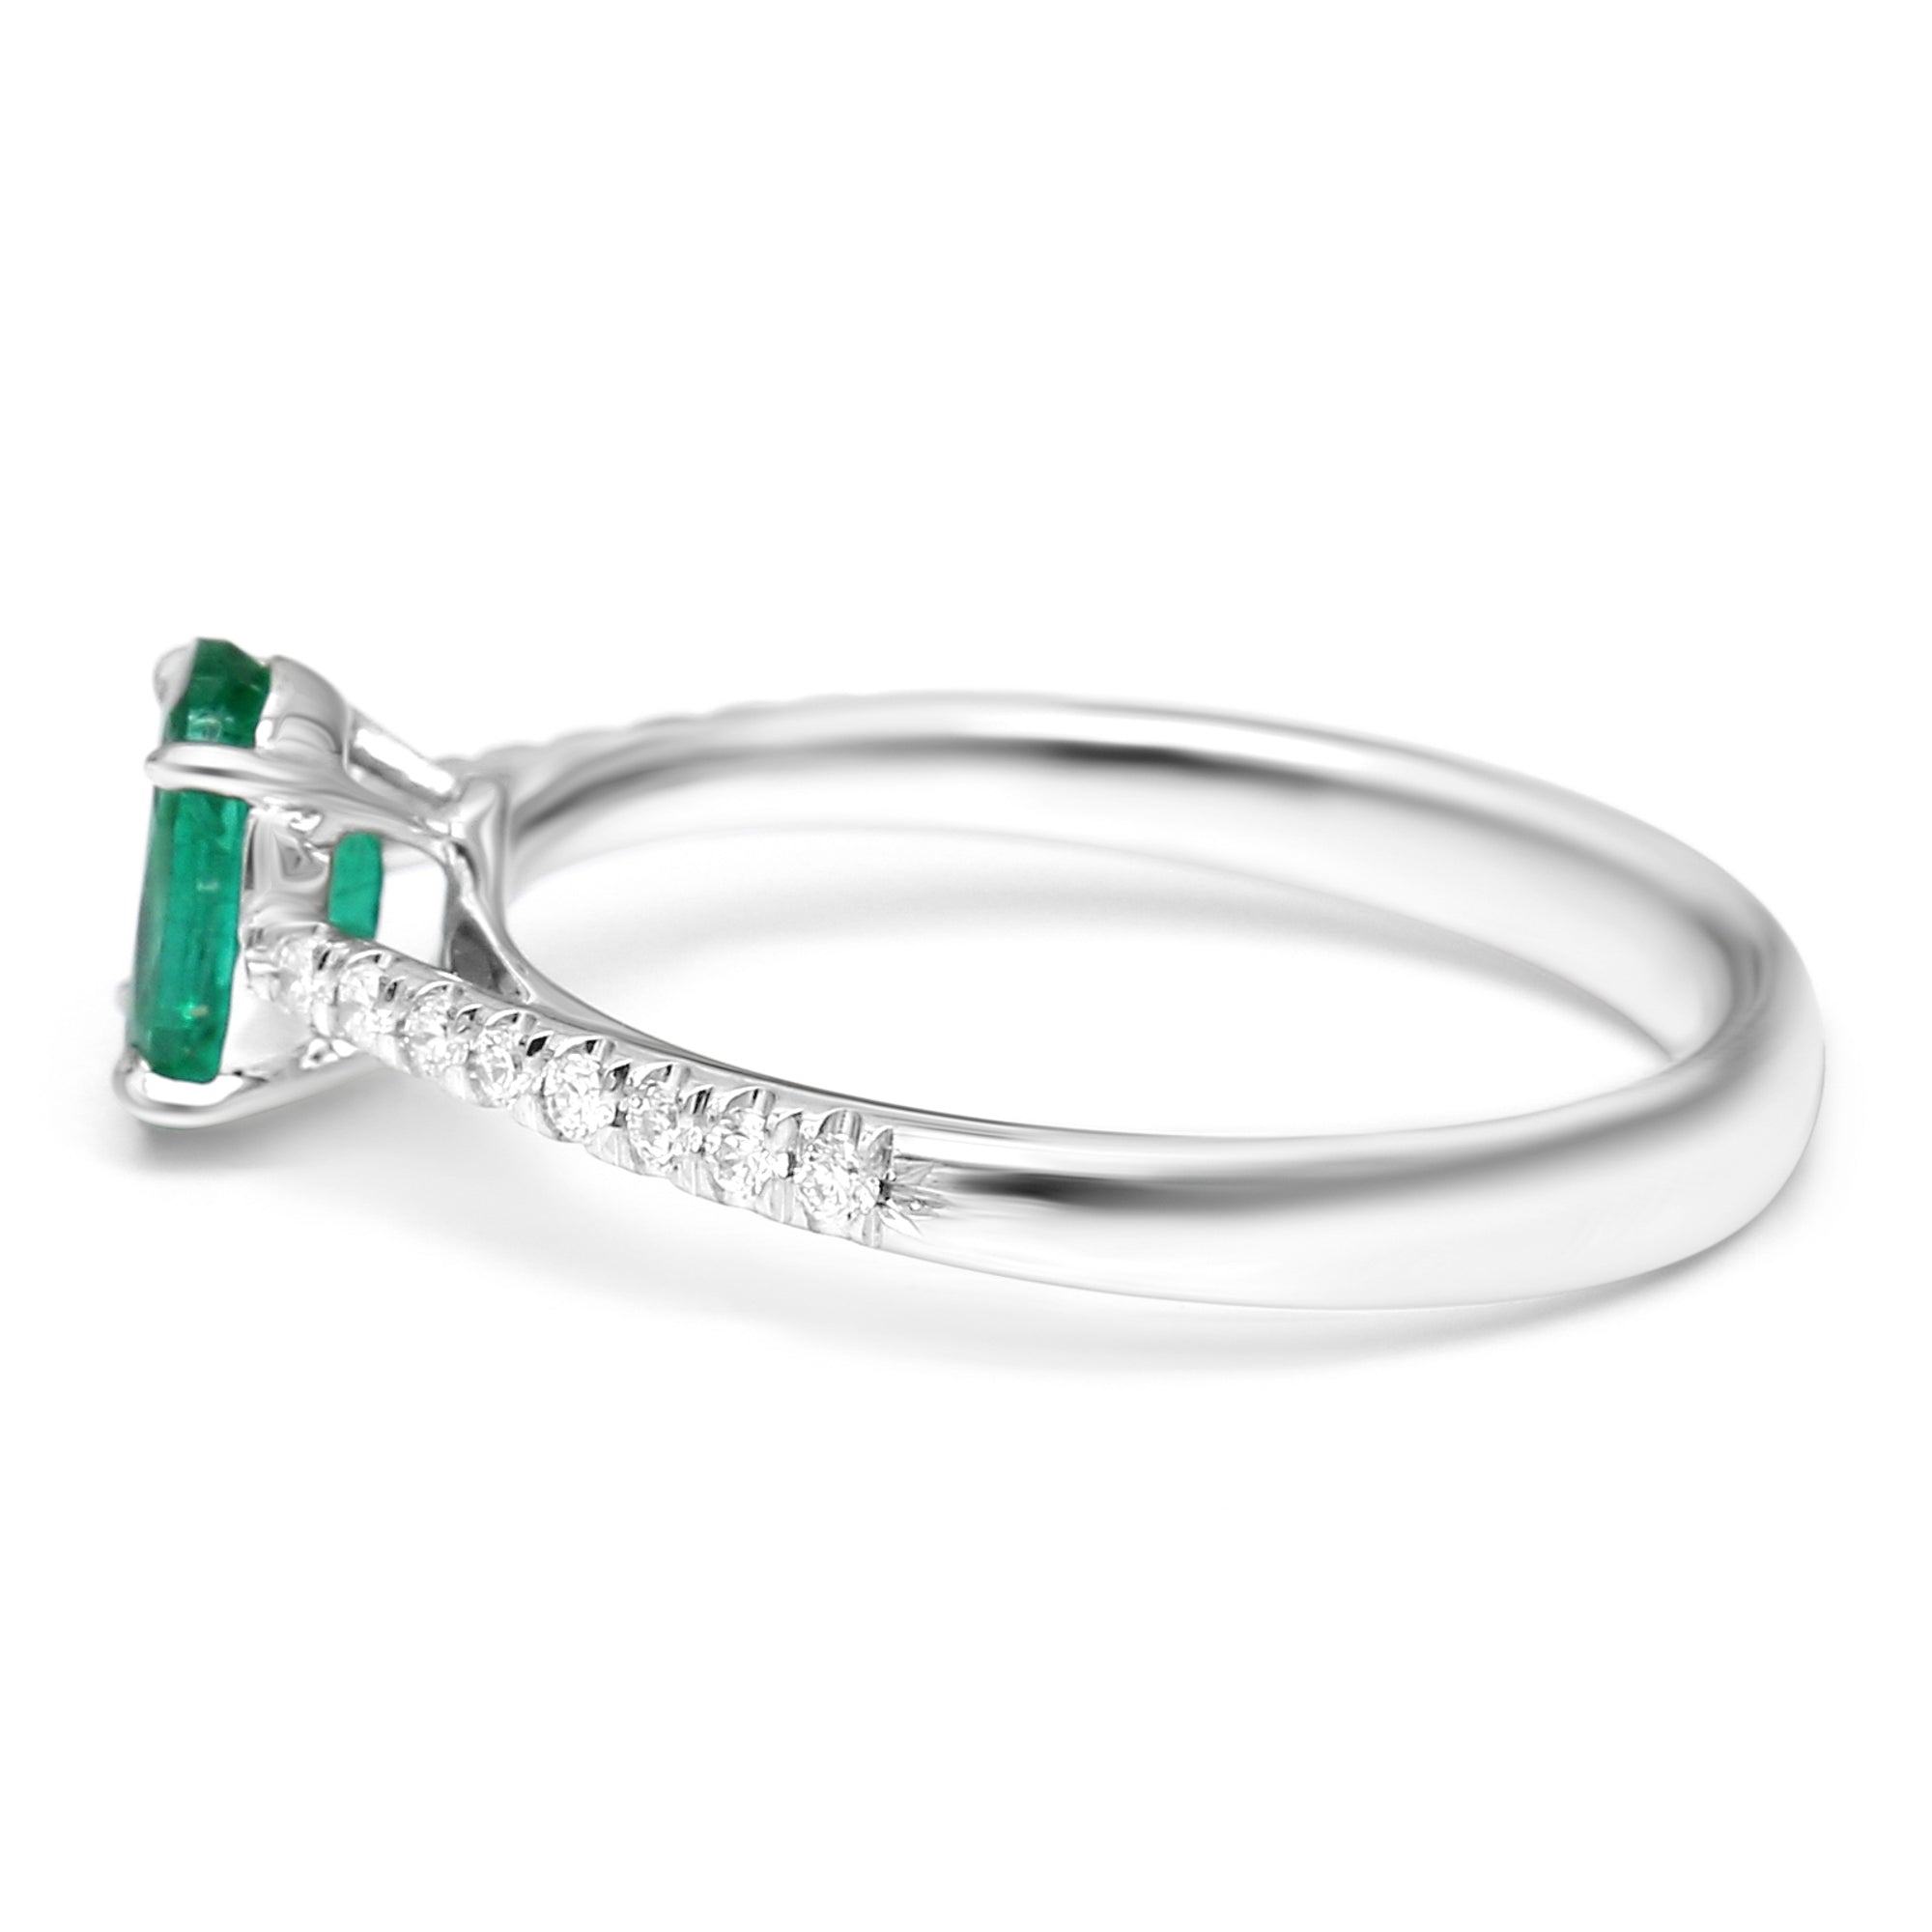 Emerald Oval Ring with Diamonds - 0.92ct TW